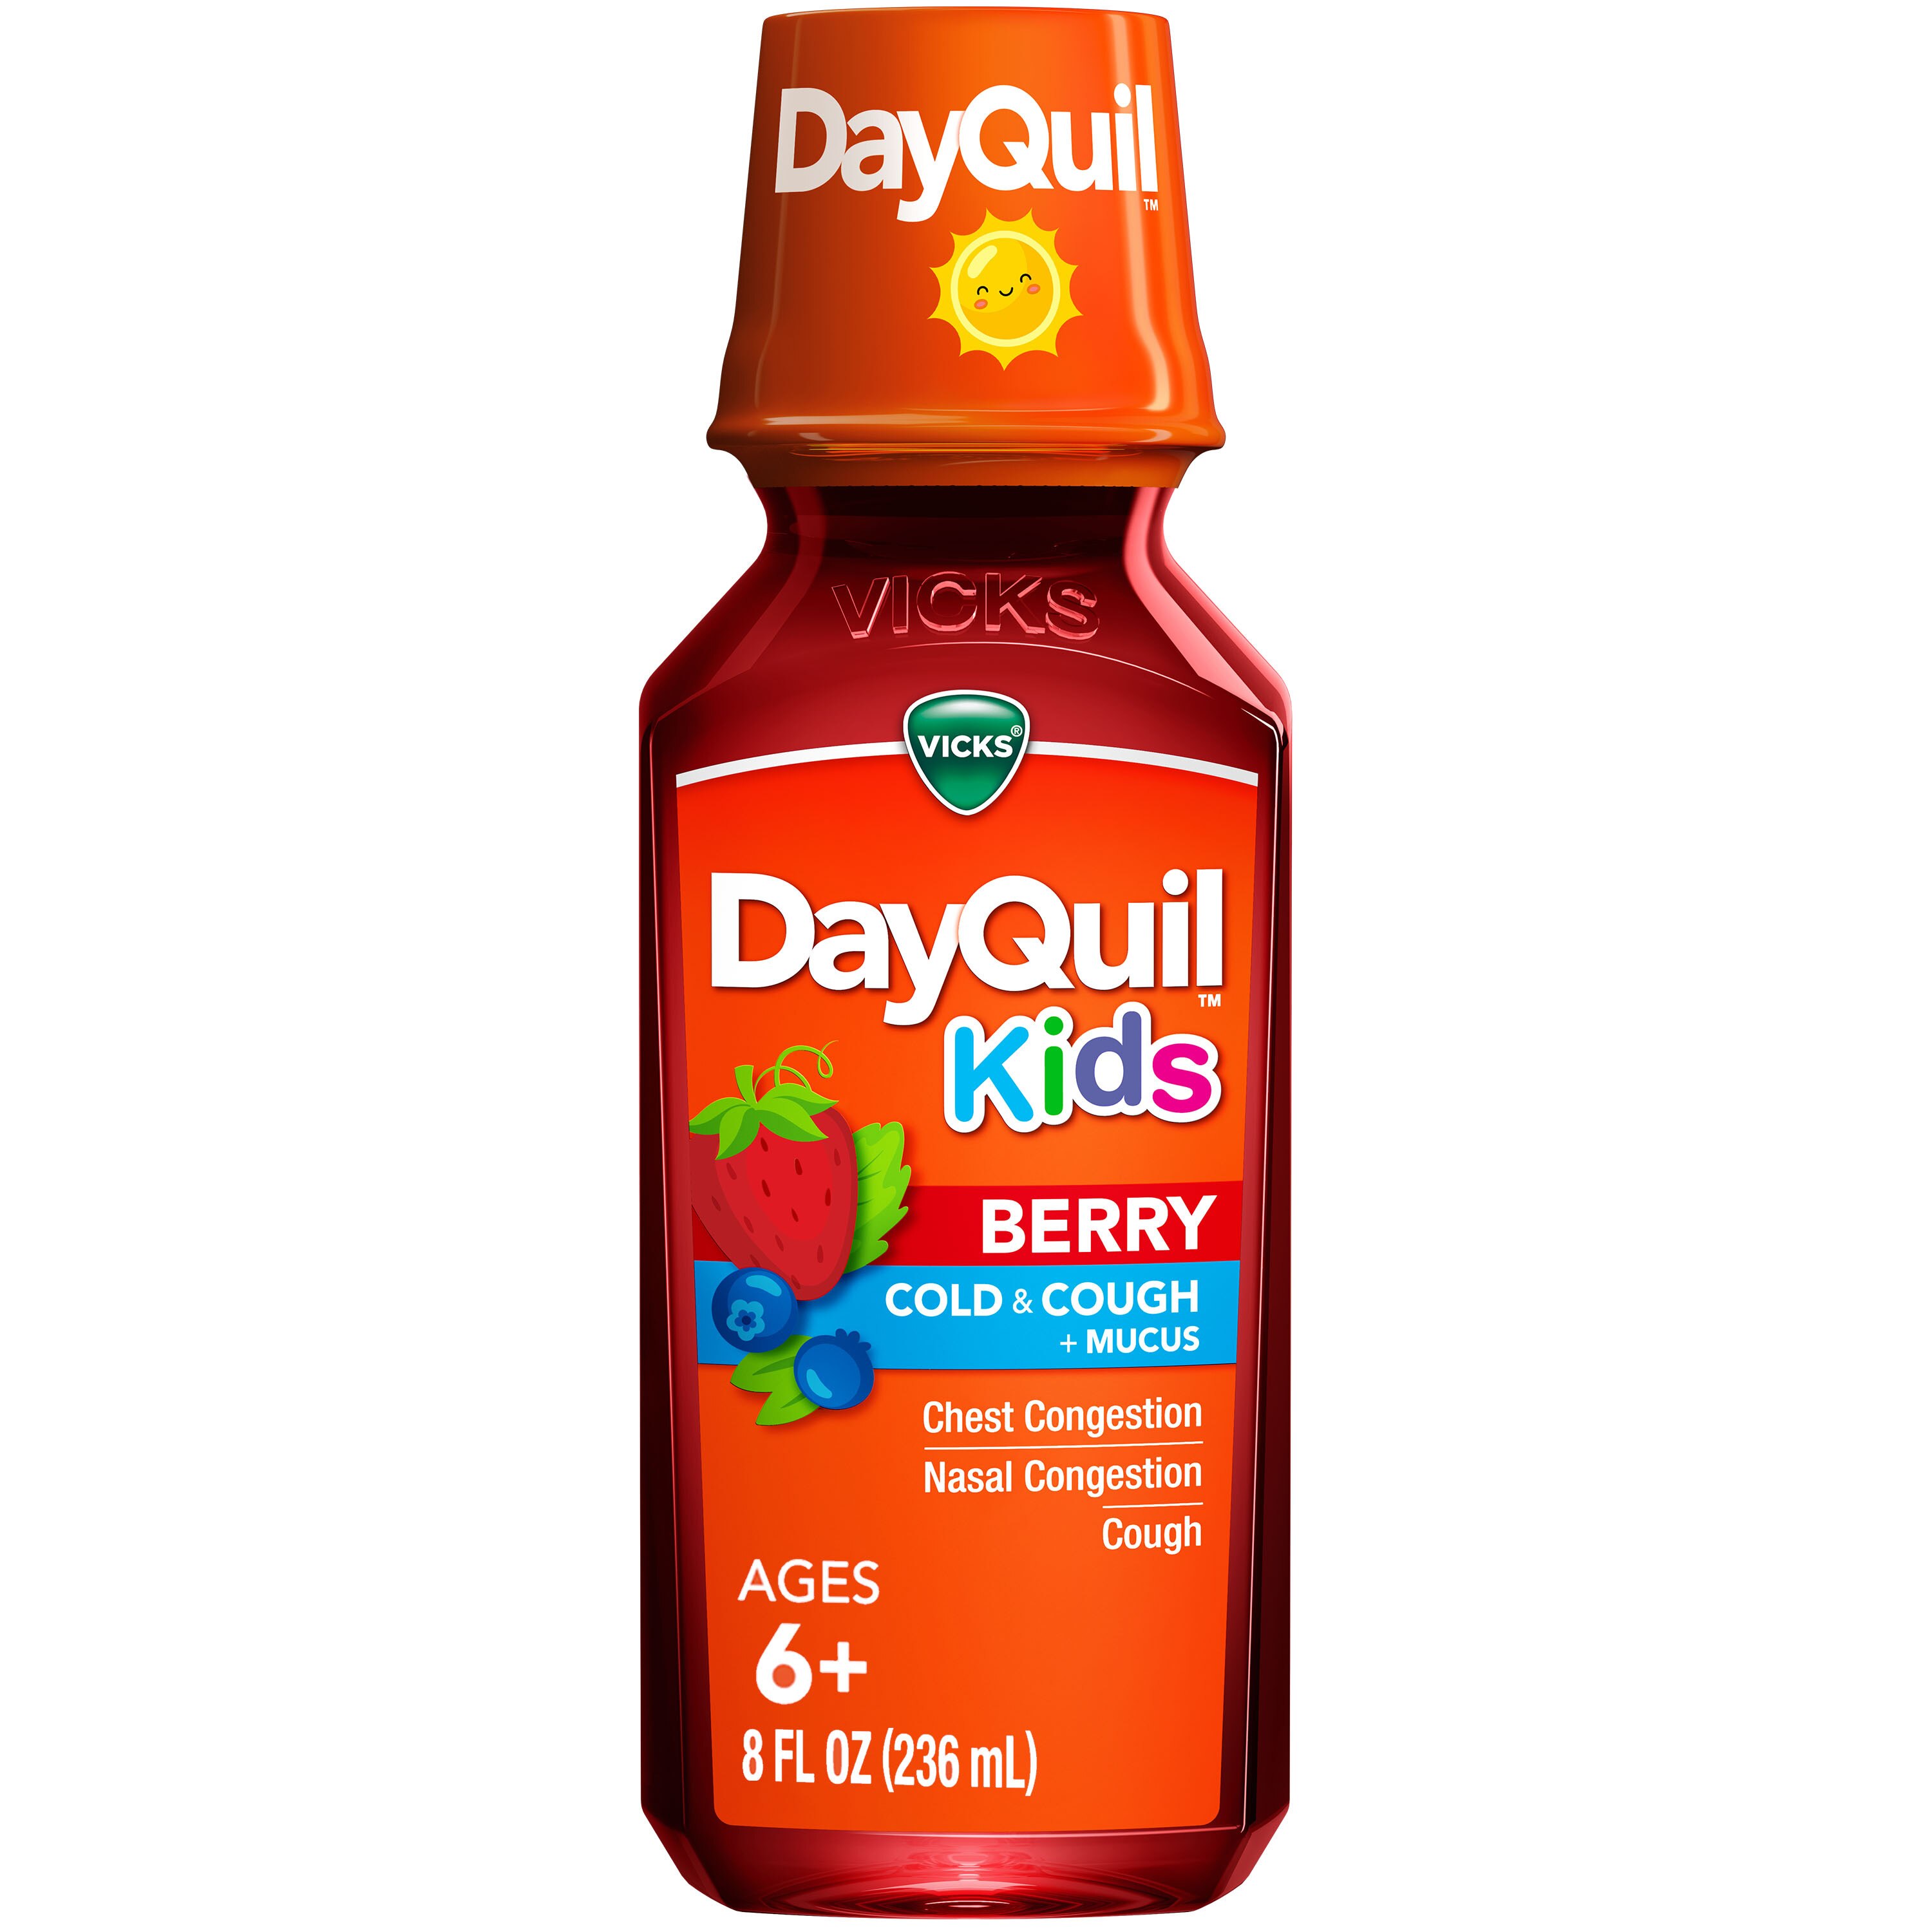 VICKS DayQuil Kids Berry Cold & Cough + Mucus Multi-Symptom Relief, Daytime Relief, 8 FL Oz - 8 Oz , CVS